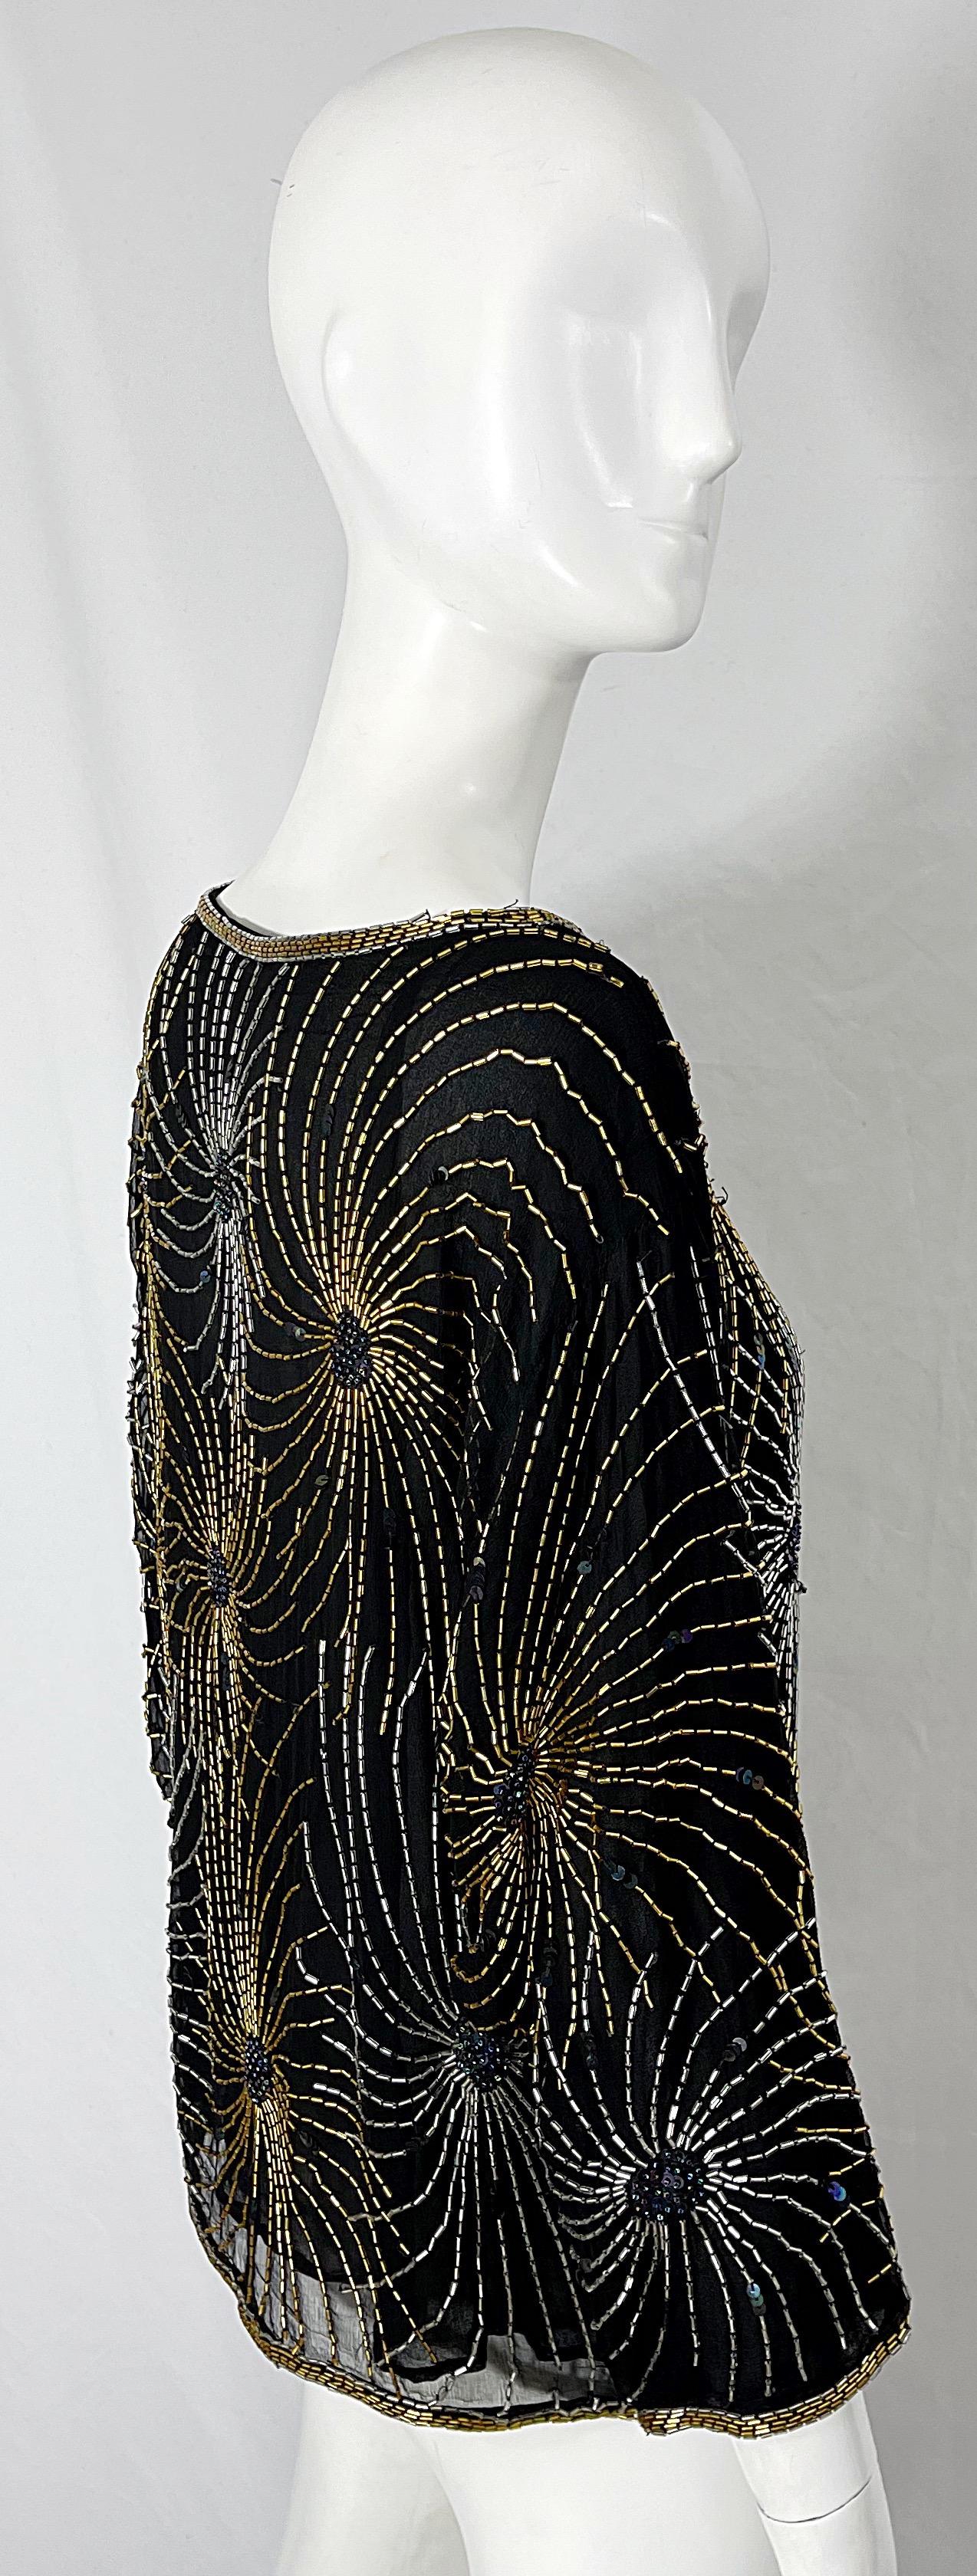 Halston 1970s Iconic Fireworks Beaded Black Silk Chiffon Vintage 70s Blouse Top For Sale 8